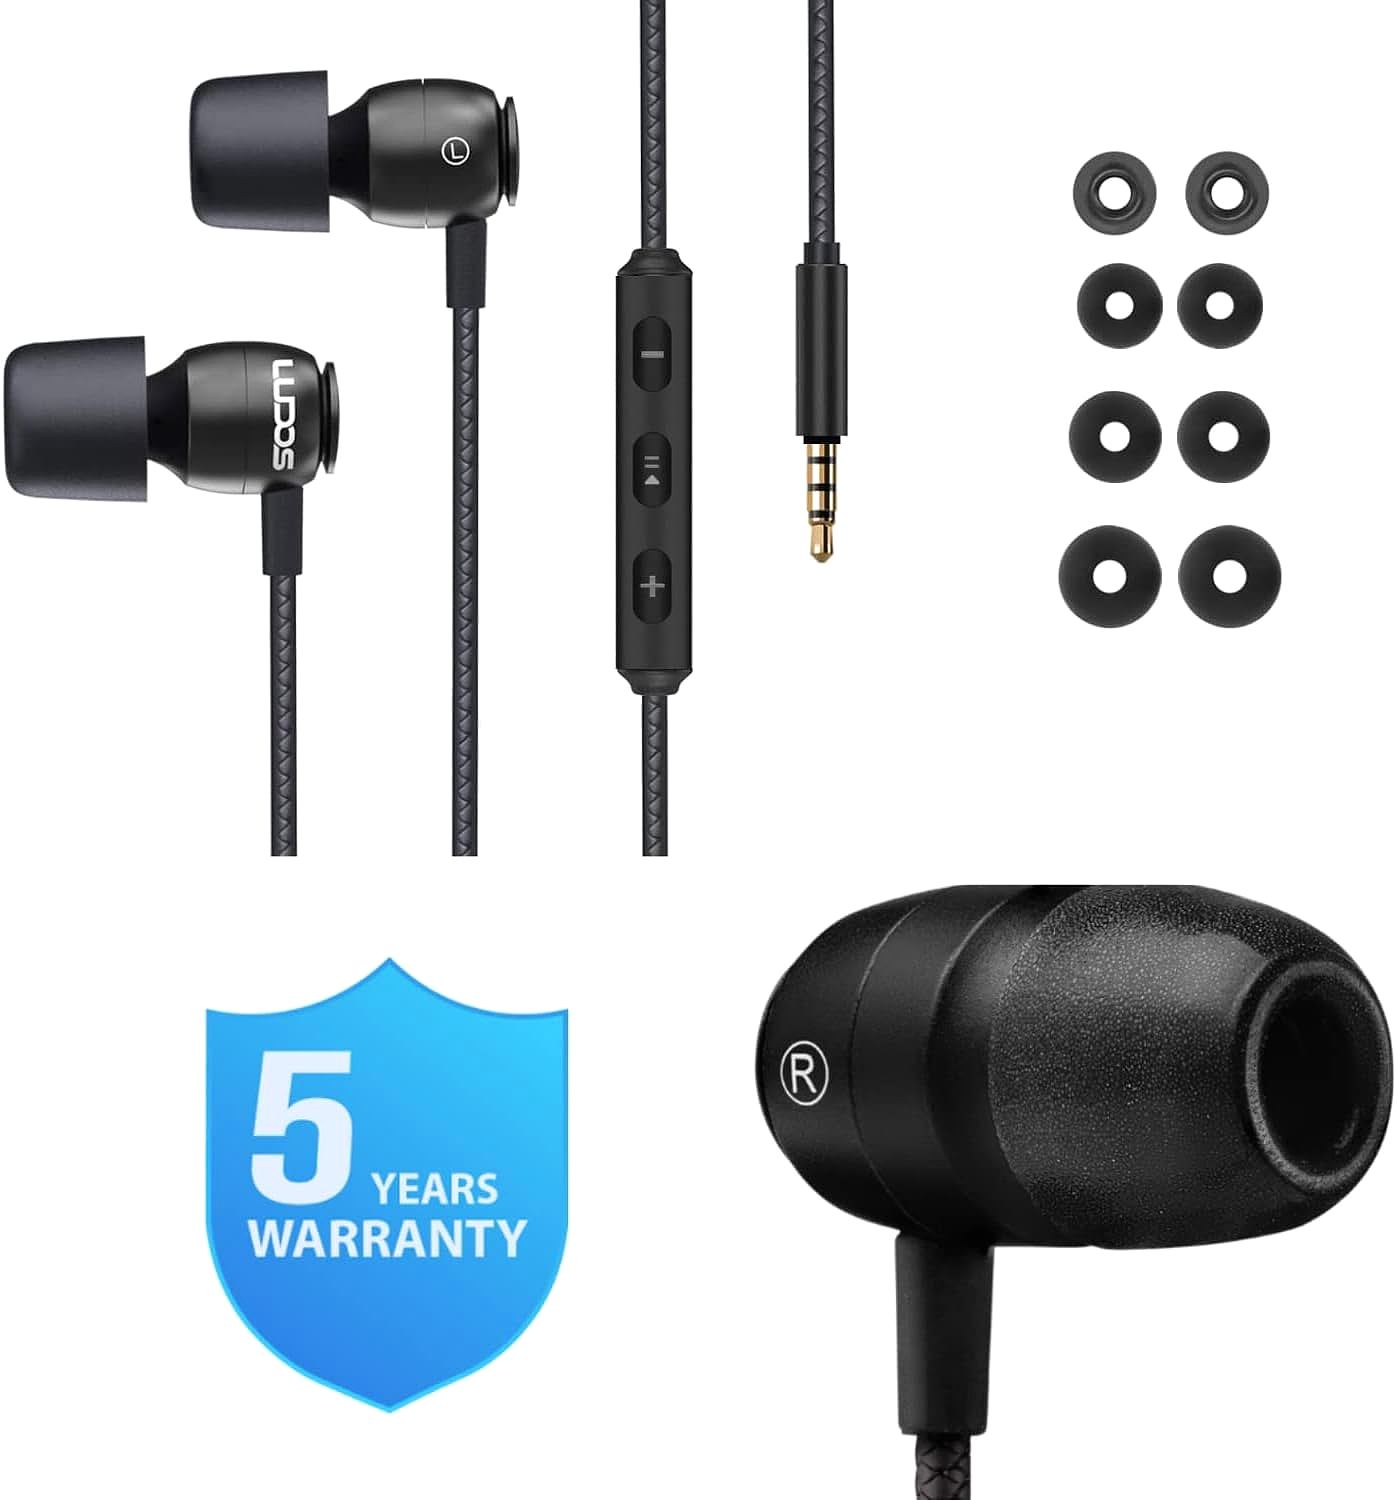  Ludos Clamor 3.5mm Wired Earbuds     